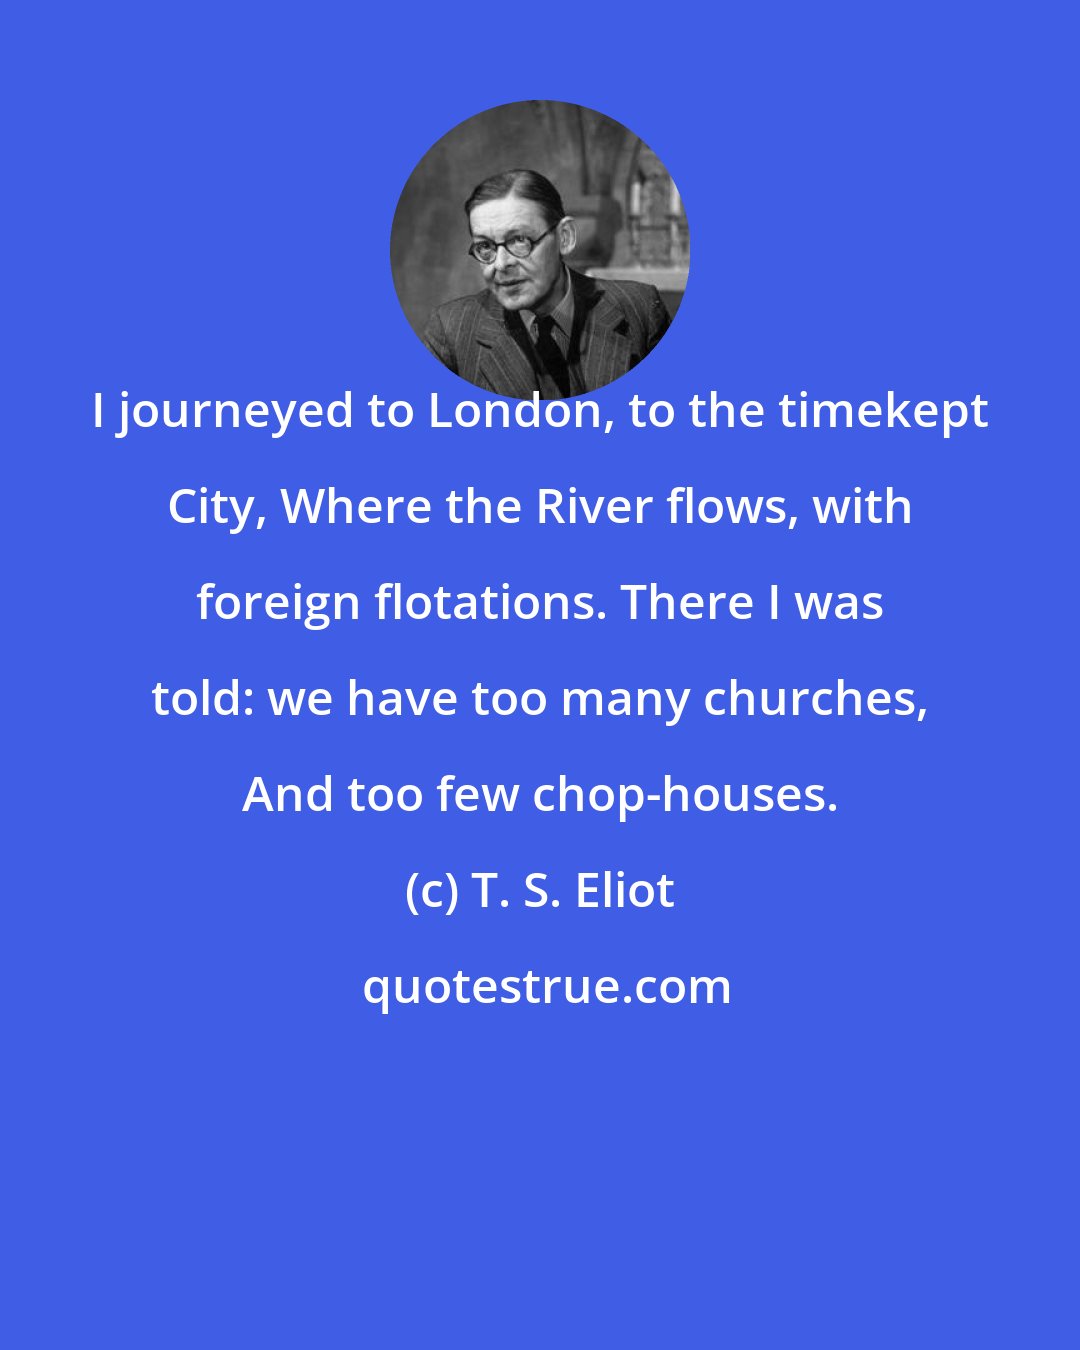 T. S. Eliot: I journeyed to London, to the timekept City, Where the River flows, with foreign flotations. There I was told: we have too many churches, And too few chop-houses.